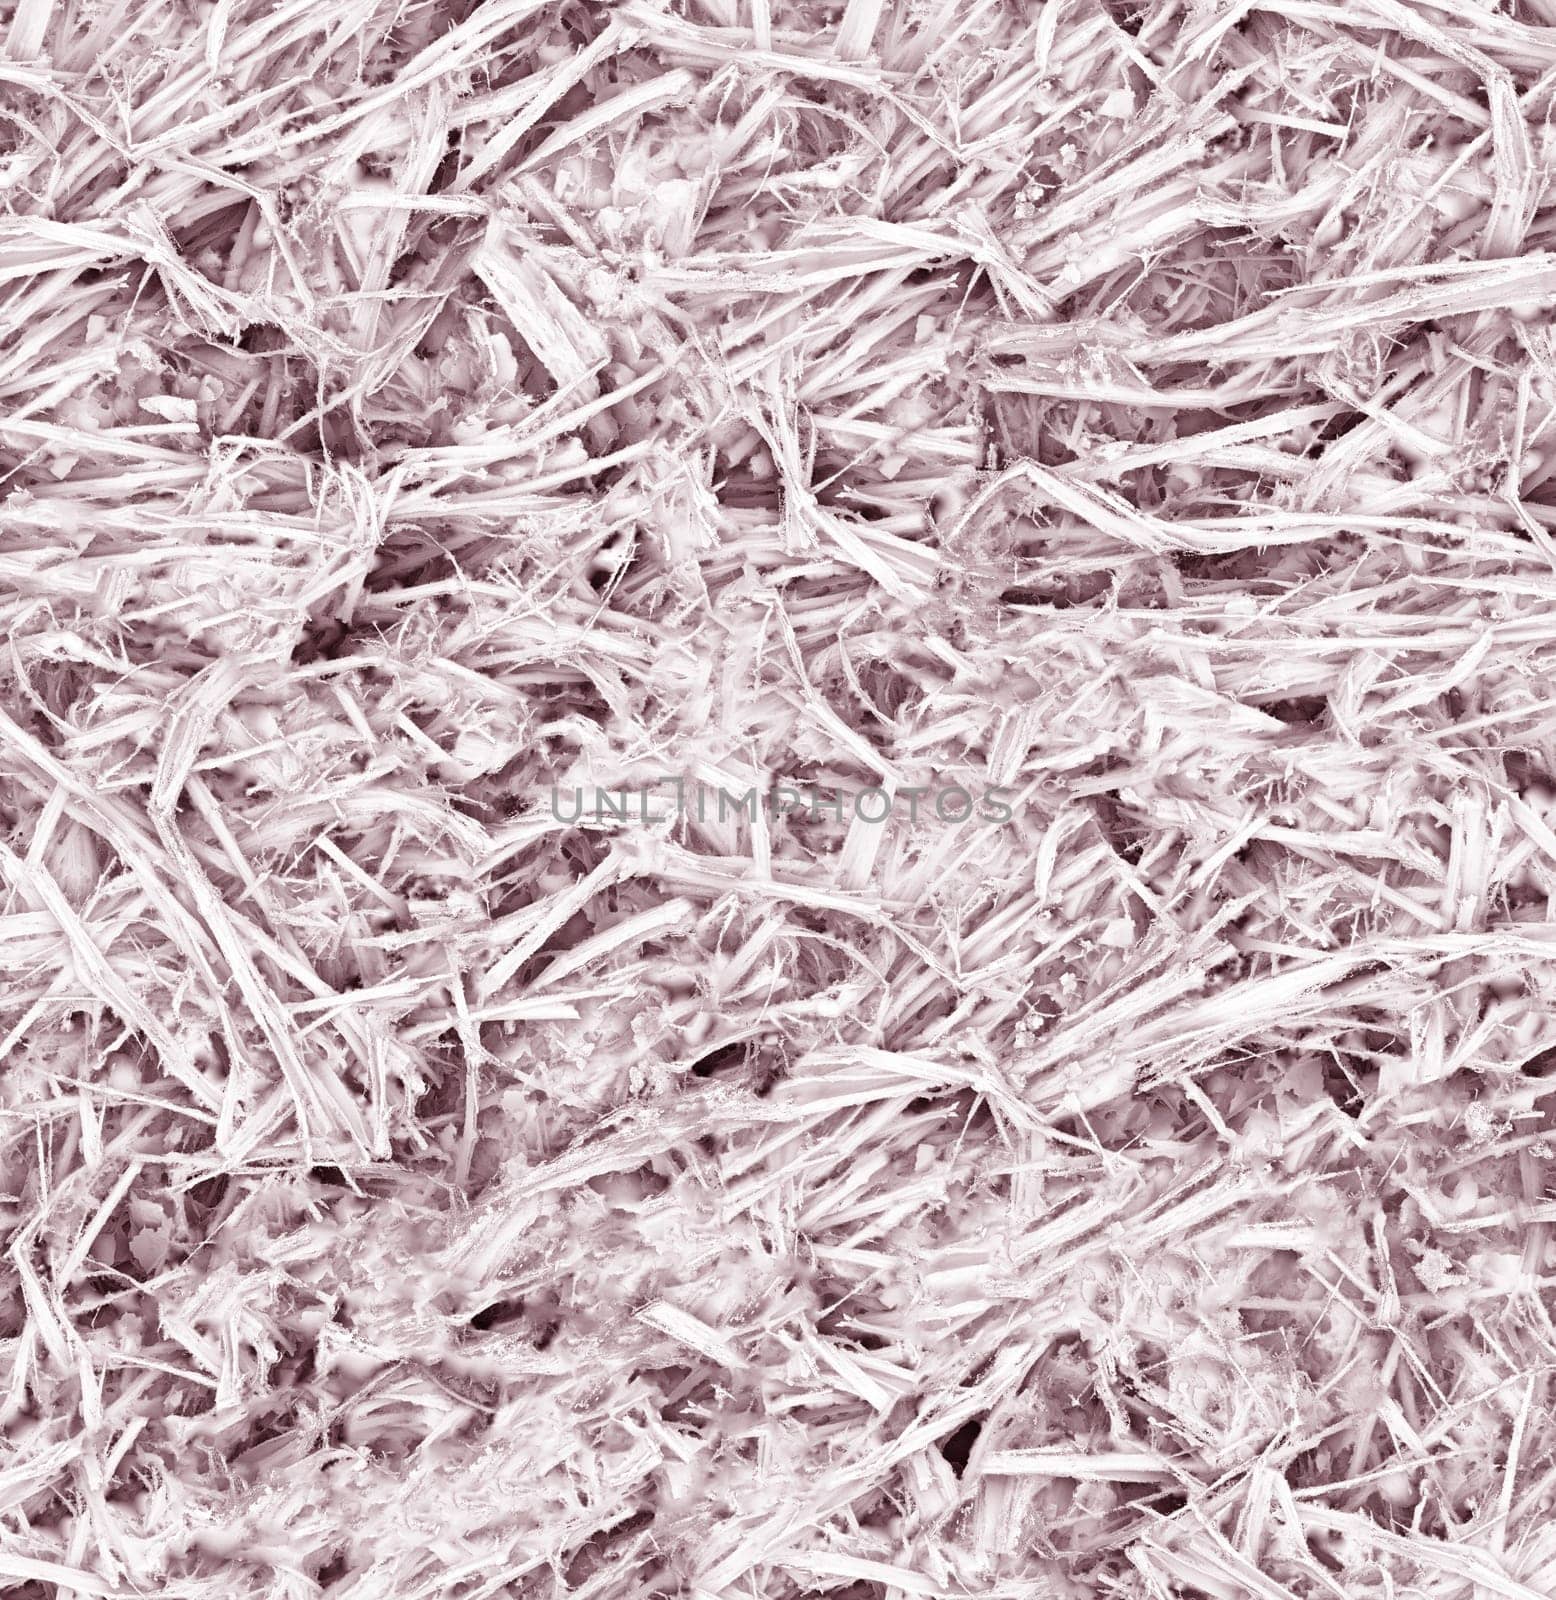 Abstract grey grunge-style background with stem fibers and irregularities close-up from above